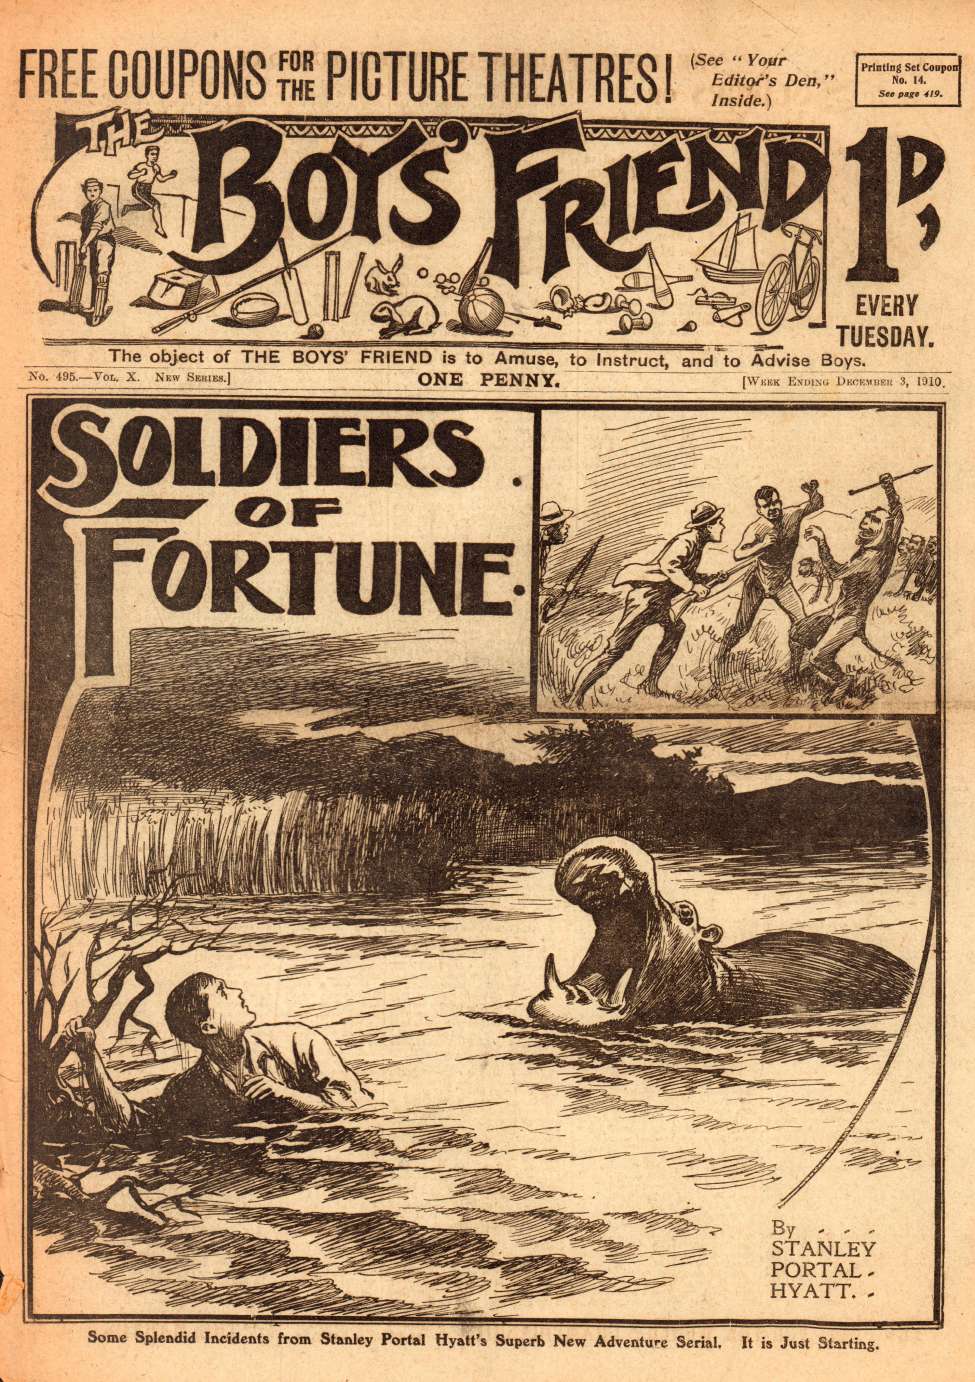 Book Cover For The Boys' Friend 495 - Soldiers of Fortune